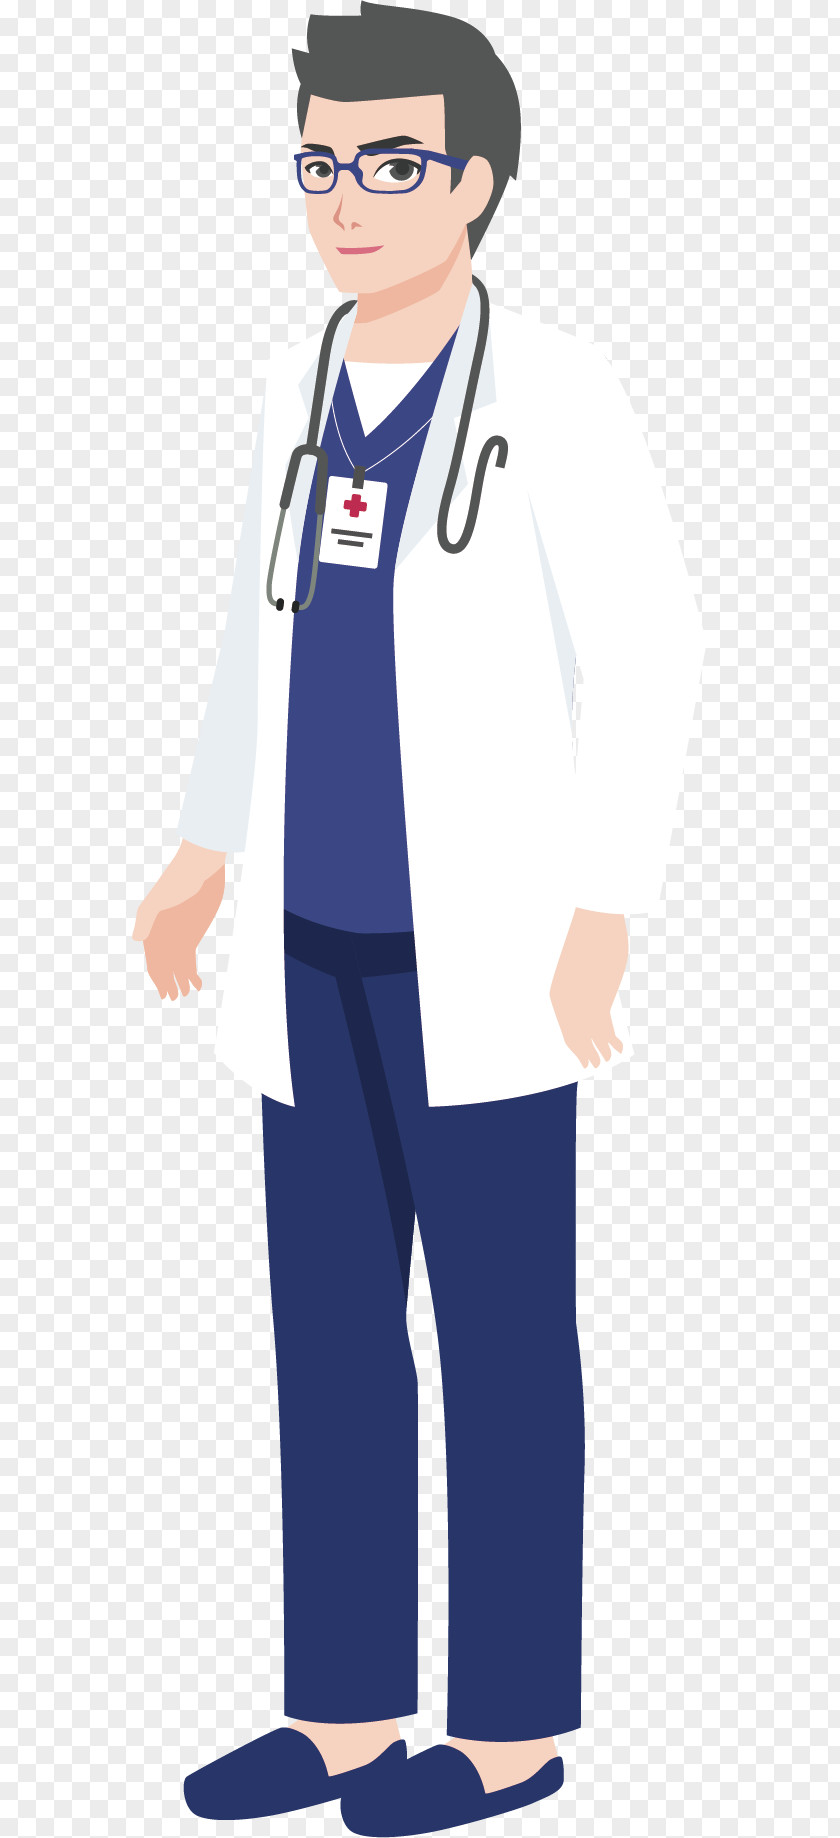 Original Chinese Doctor Cartoon Physician Illustration PNG